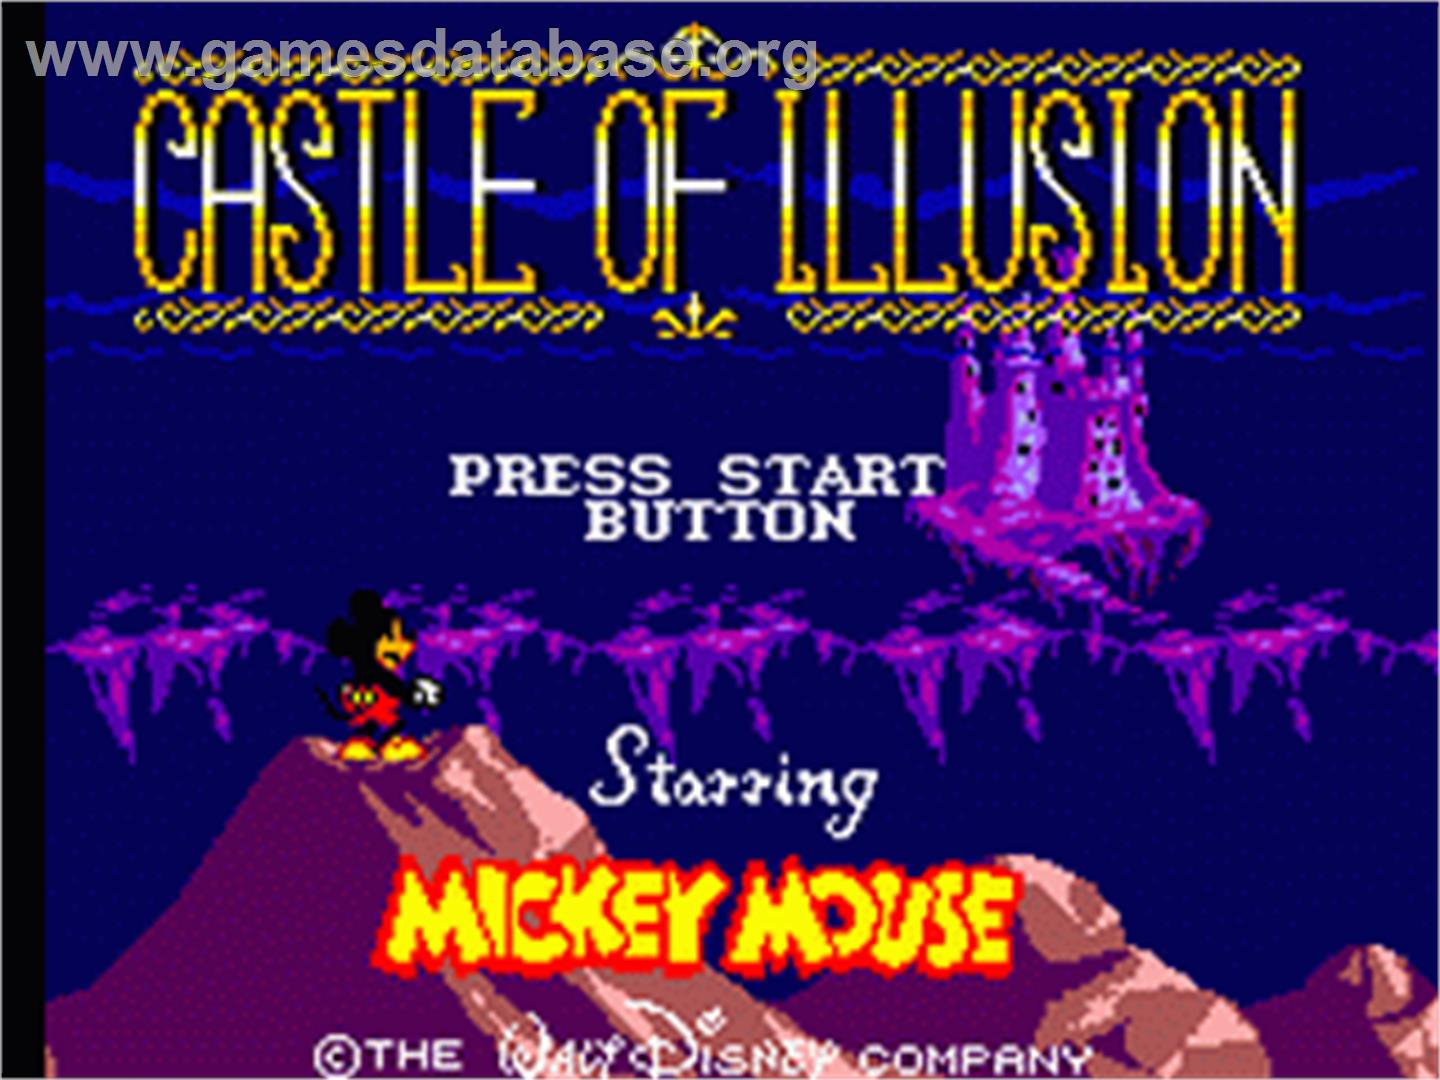 Castle of Illusion starring Mickey Mouse - Sega Game Gear - Artwork - Title Screen